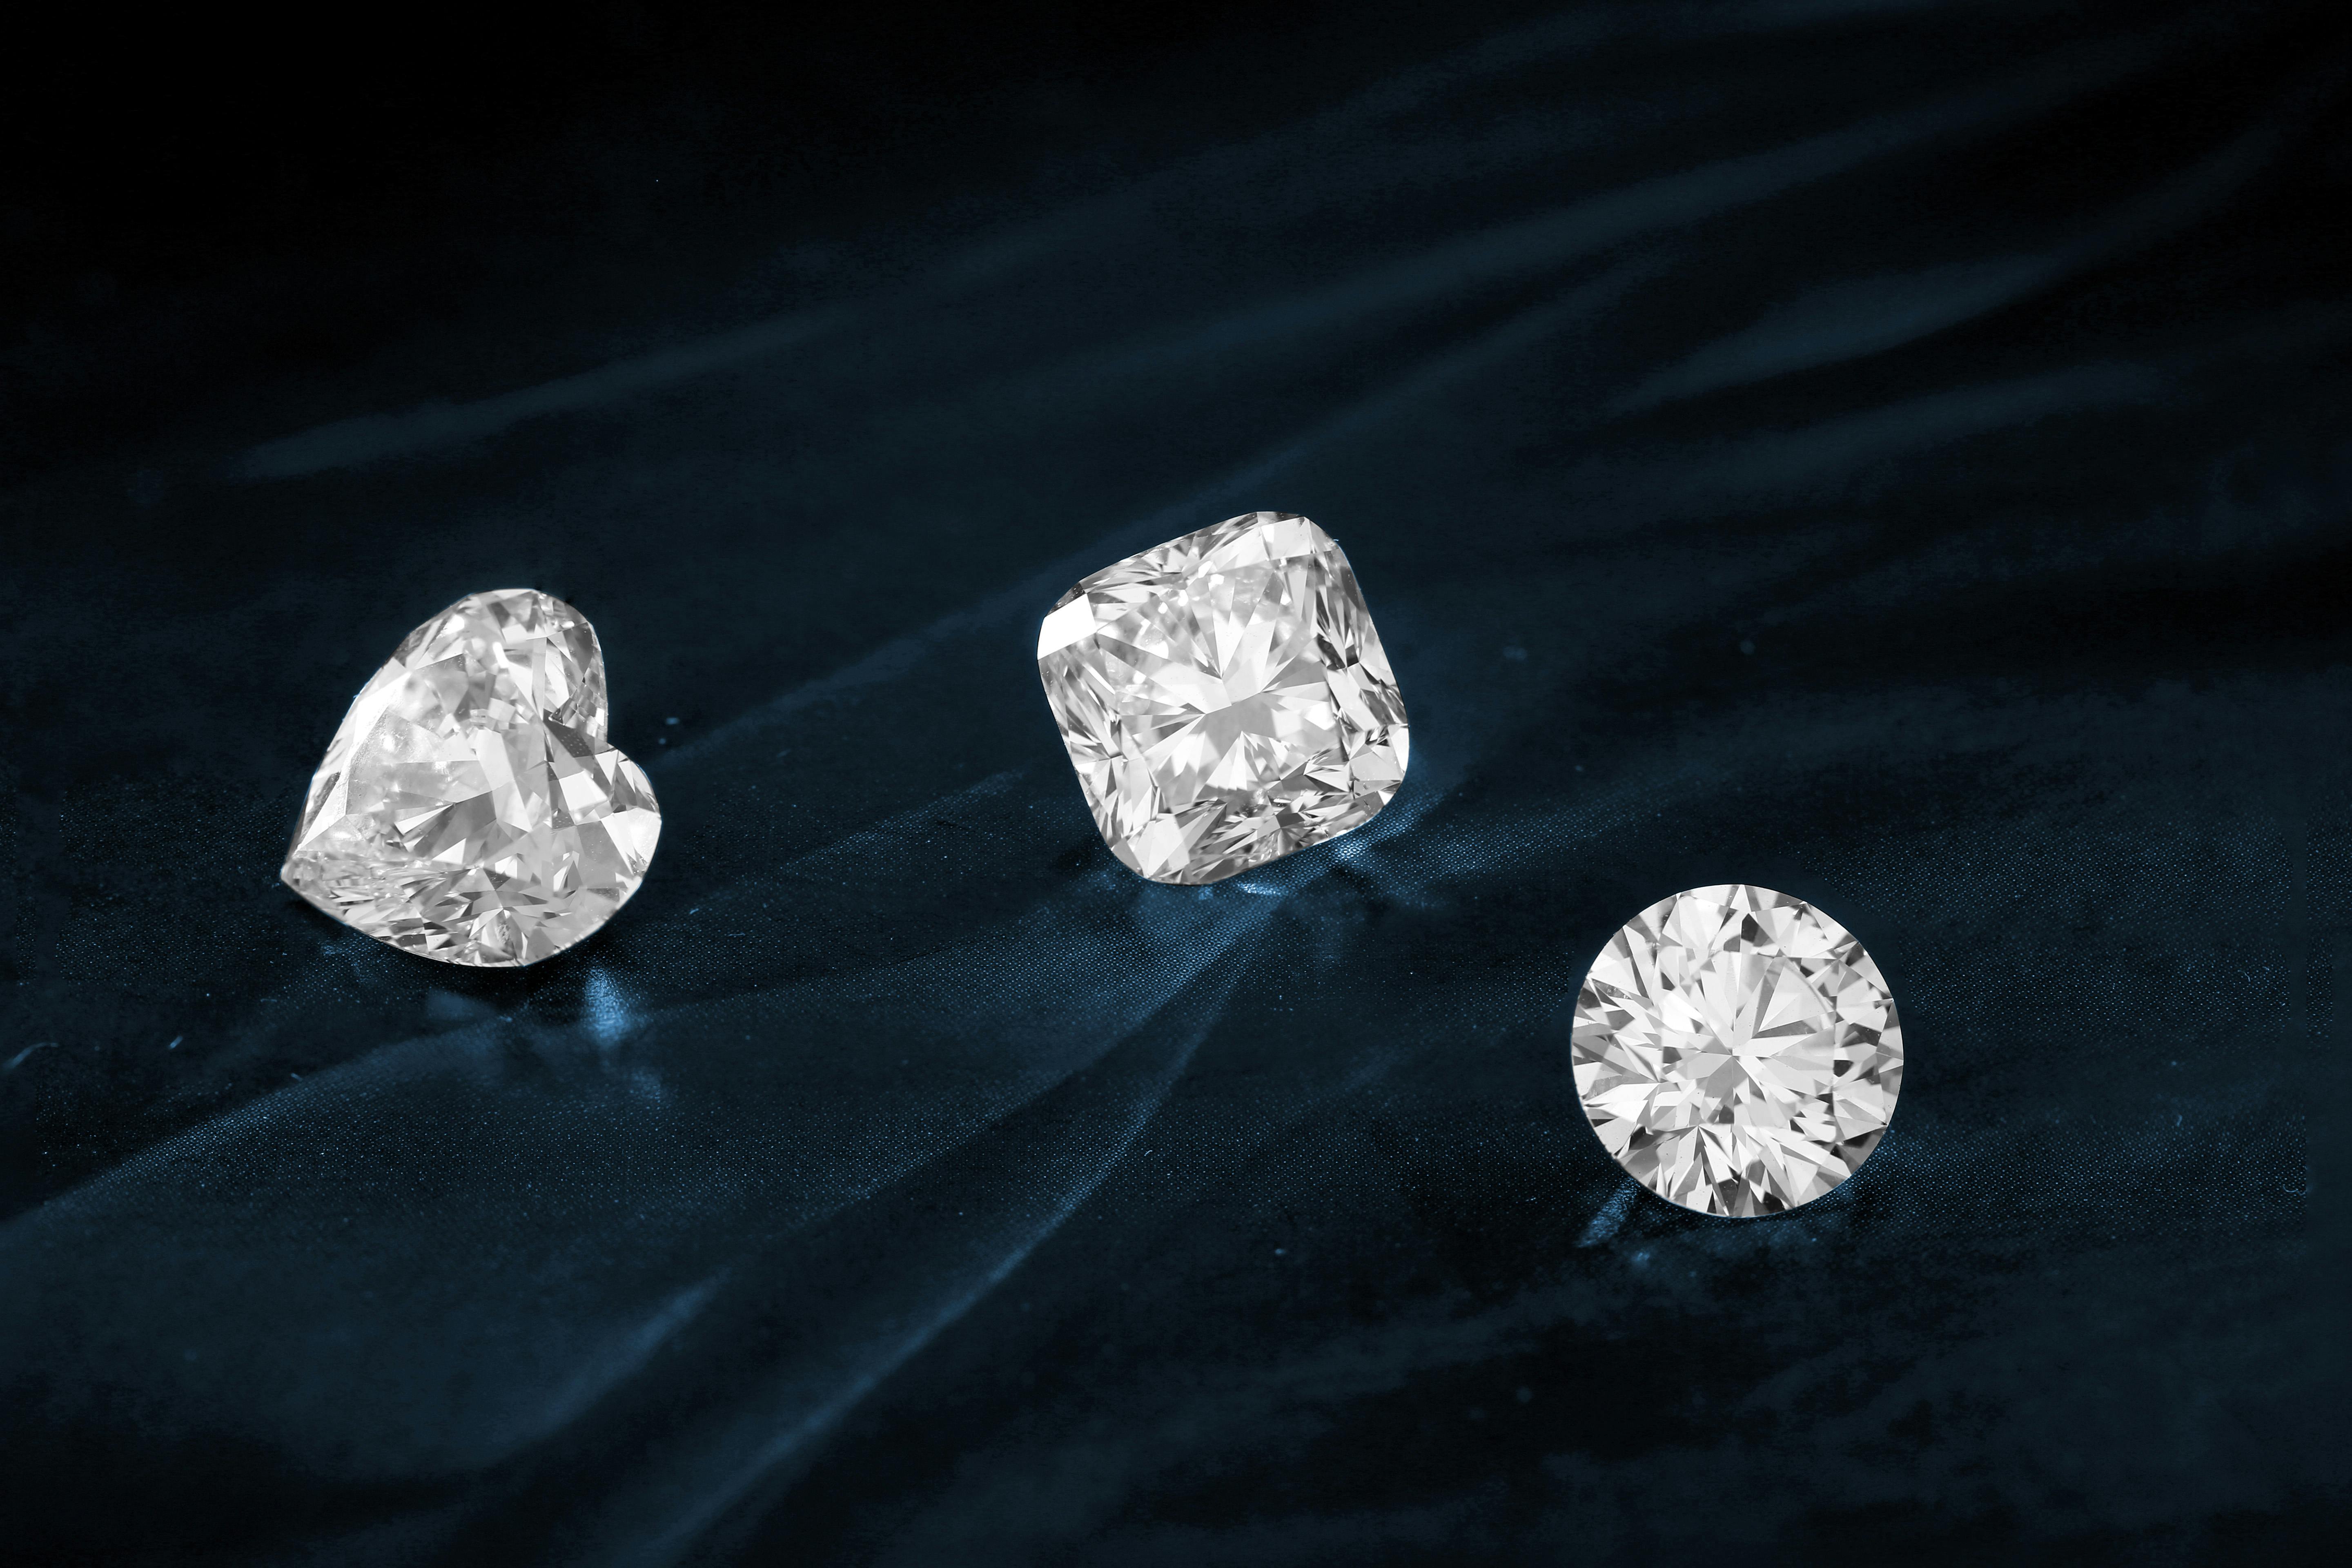 Diamonds Background Images HD Pictures and Wallpaper For Free Download   Pngtree